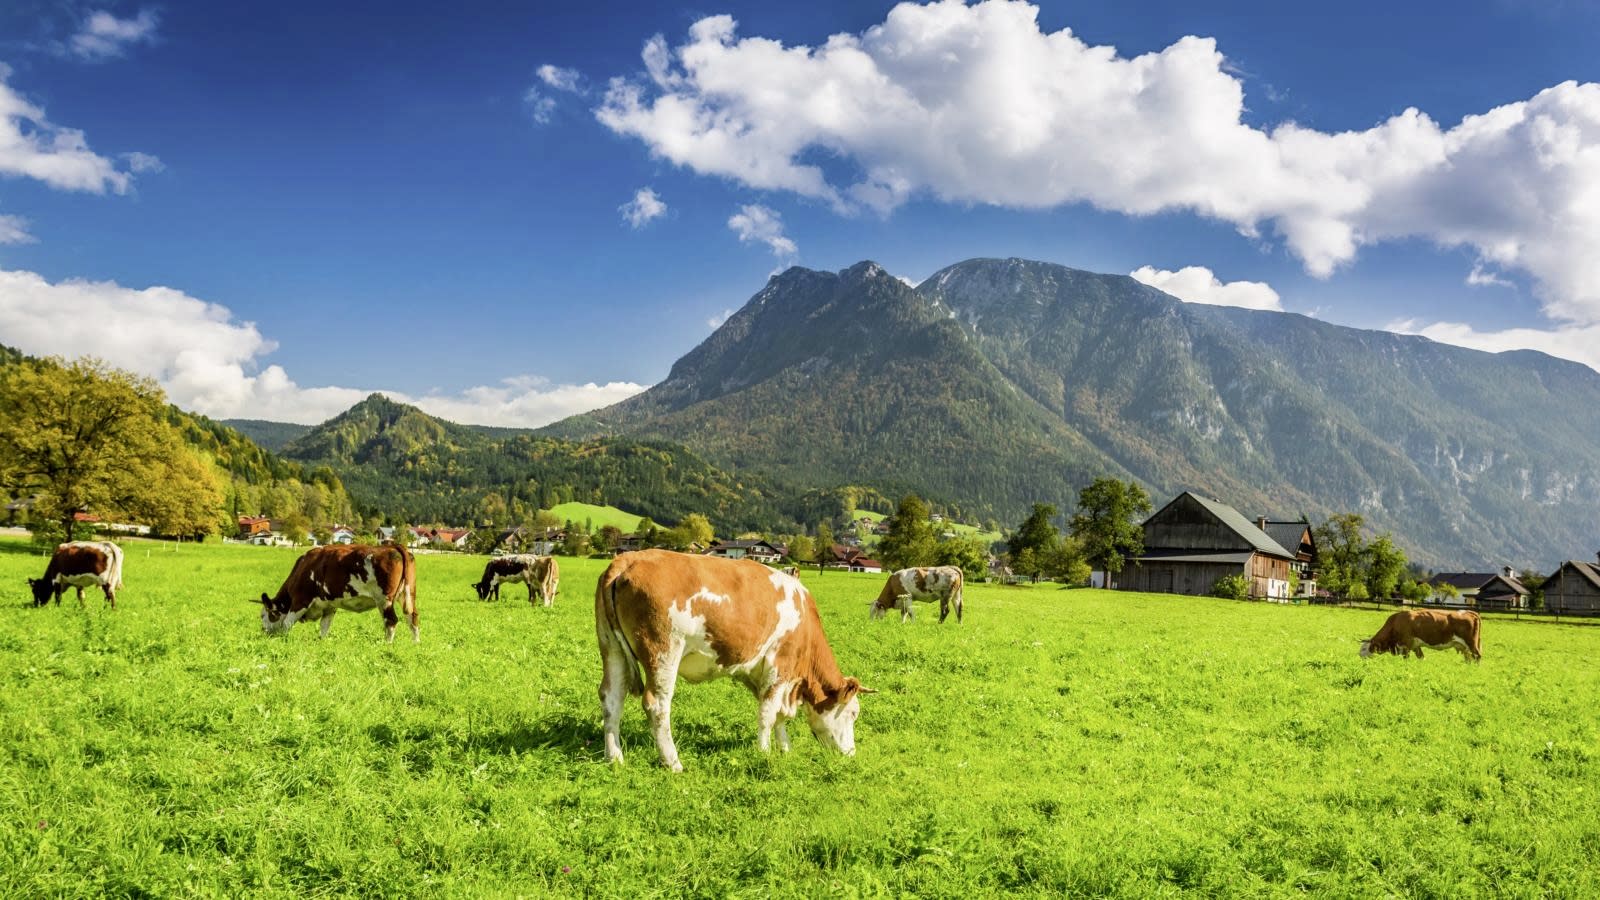 Brown cows grazing on a meadow against the backdrop of a hilly landscape